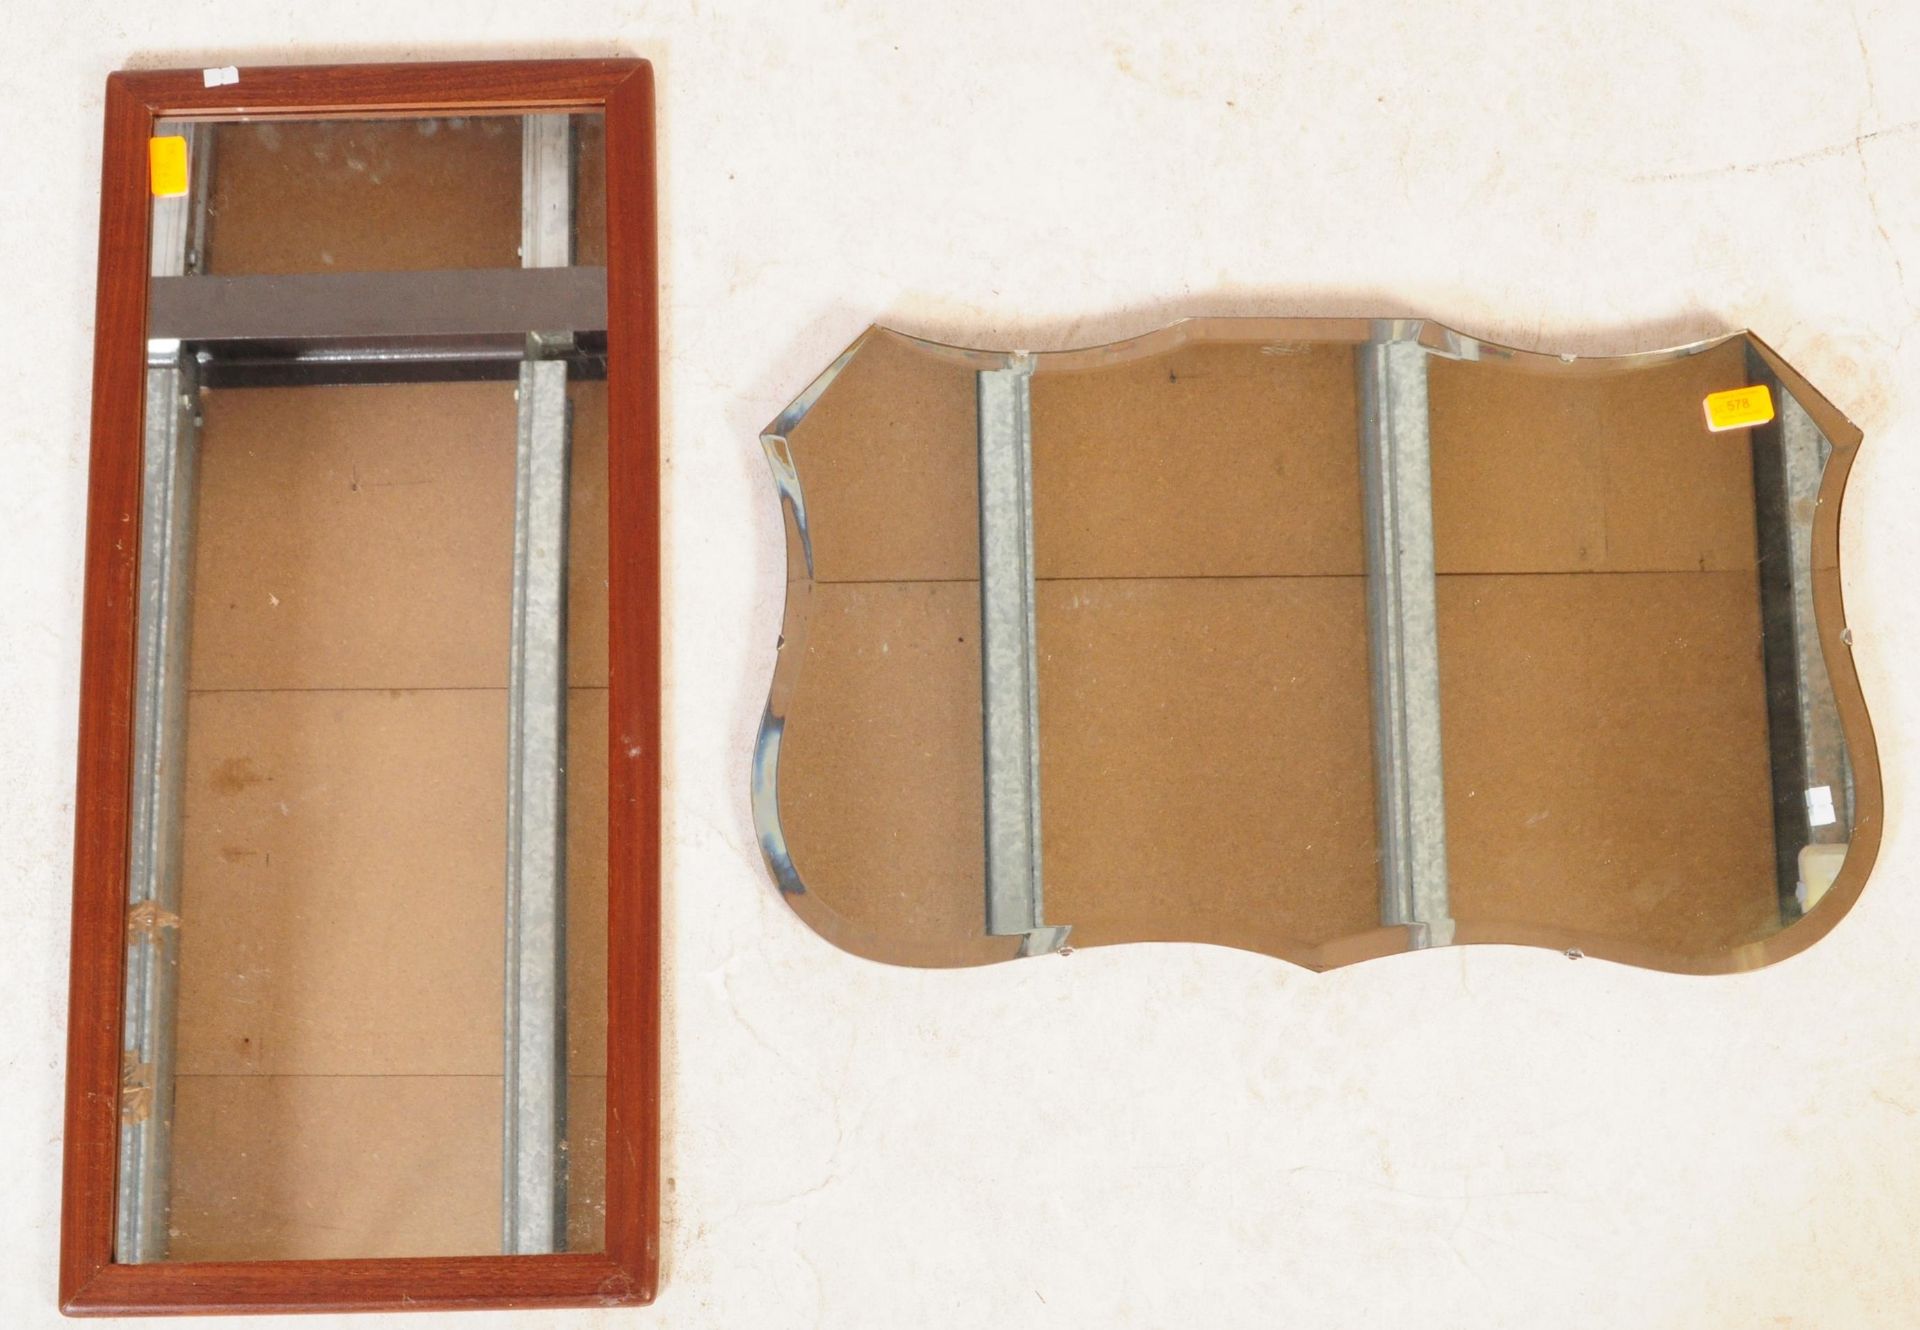 TWO 20TH CENTURY WALL MIRRORS - 1930'S & TEAK FRAME - Image 2 of 5